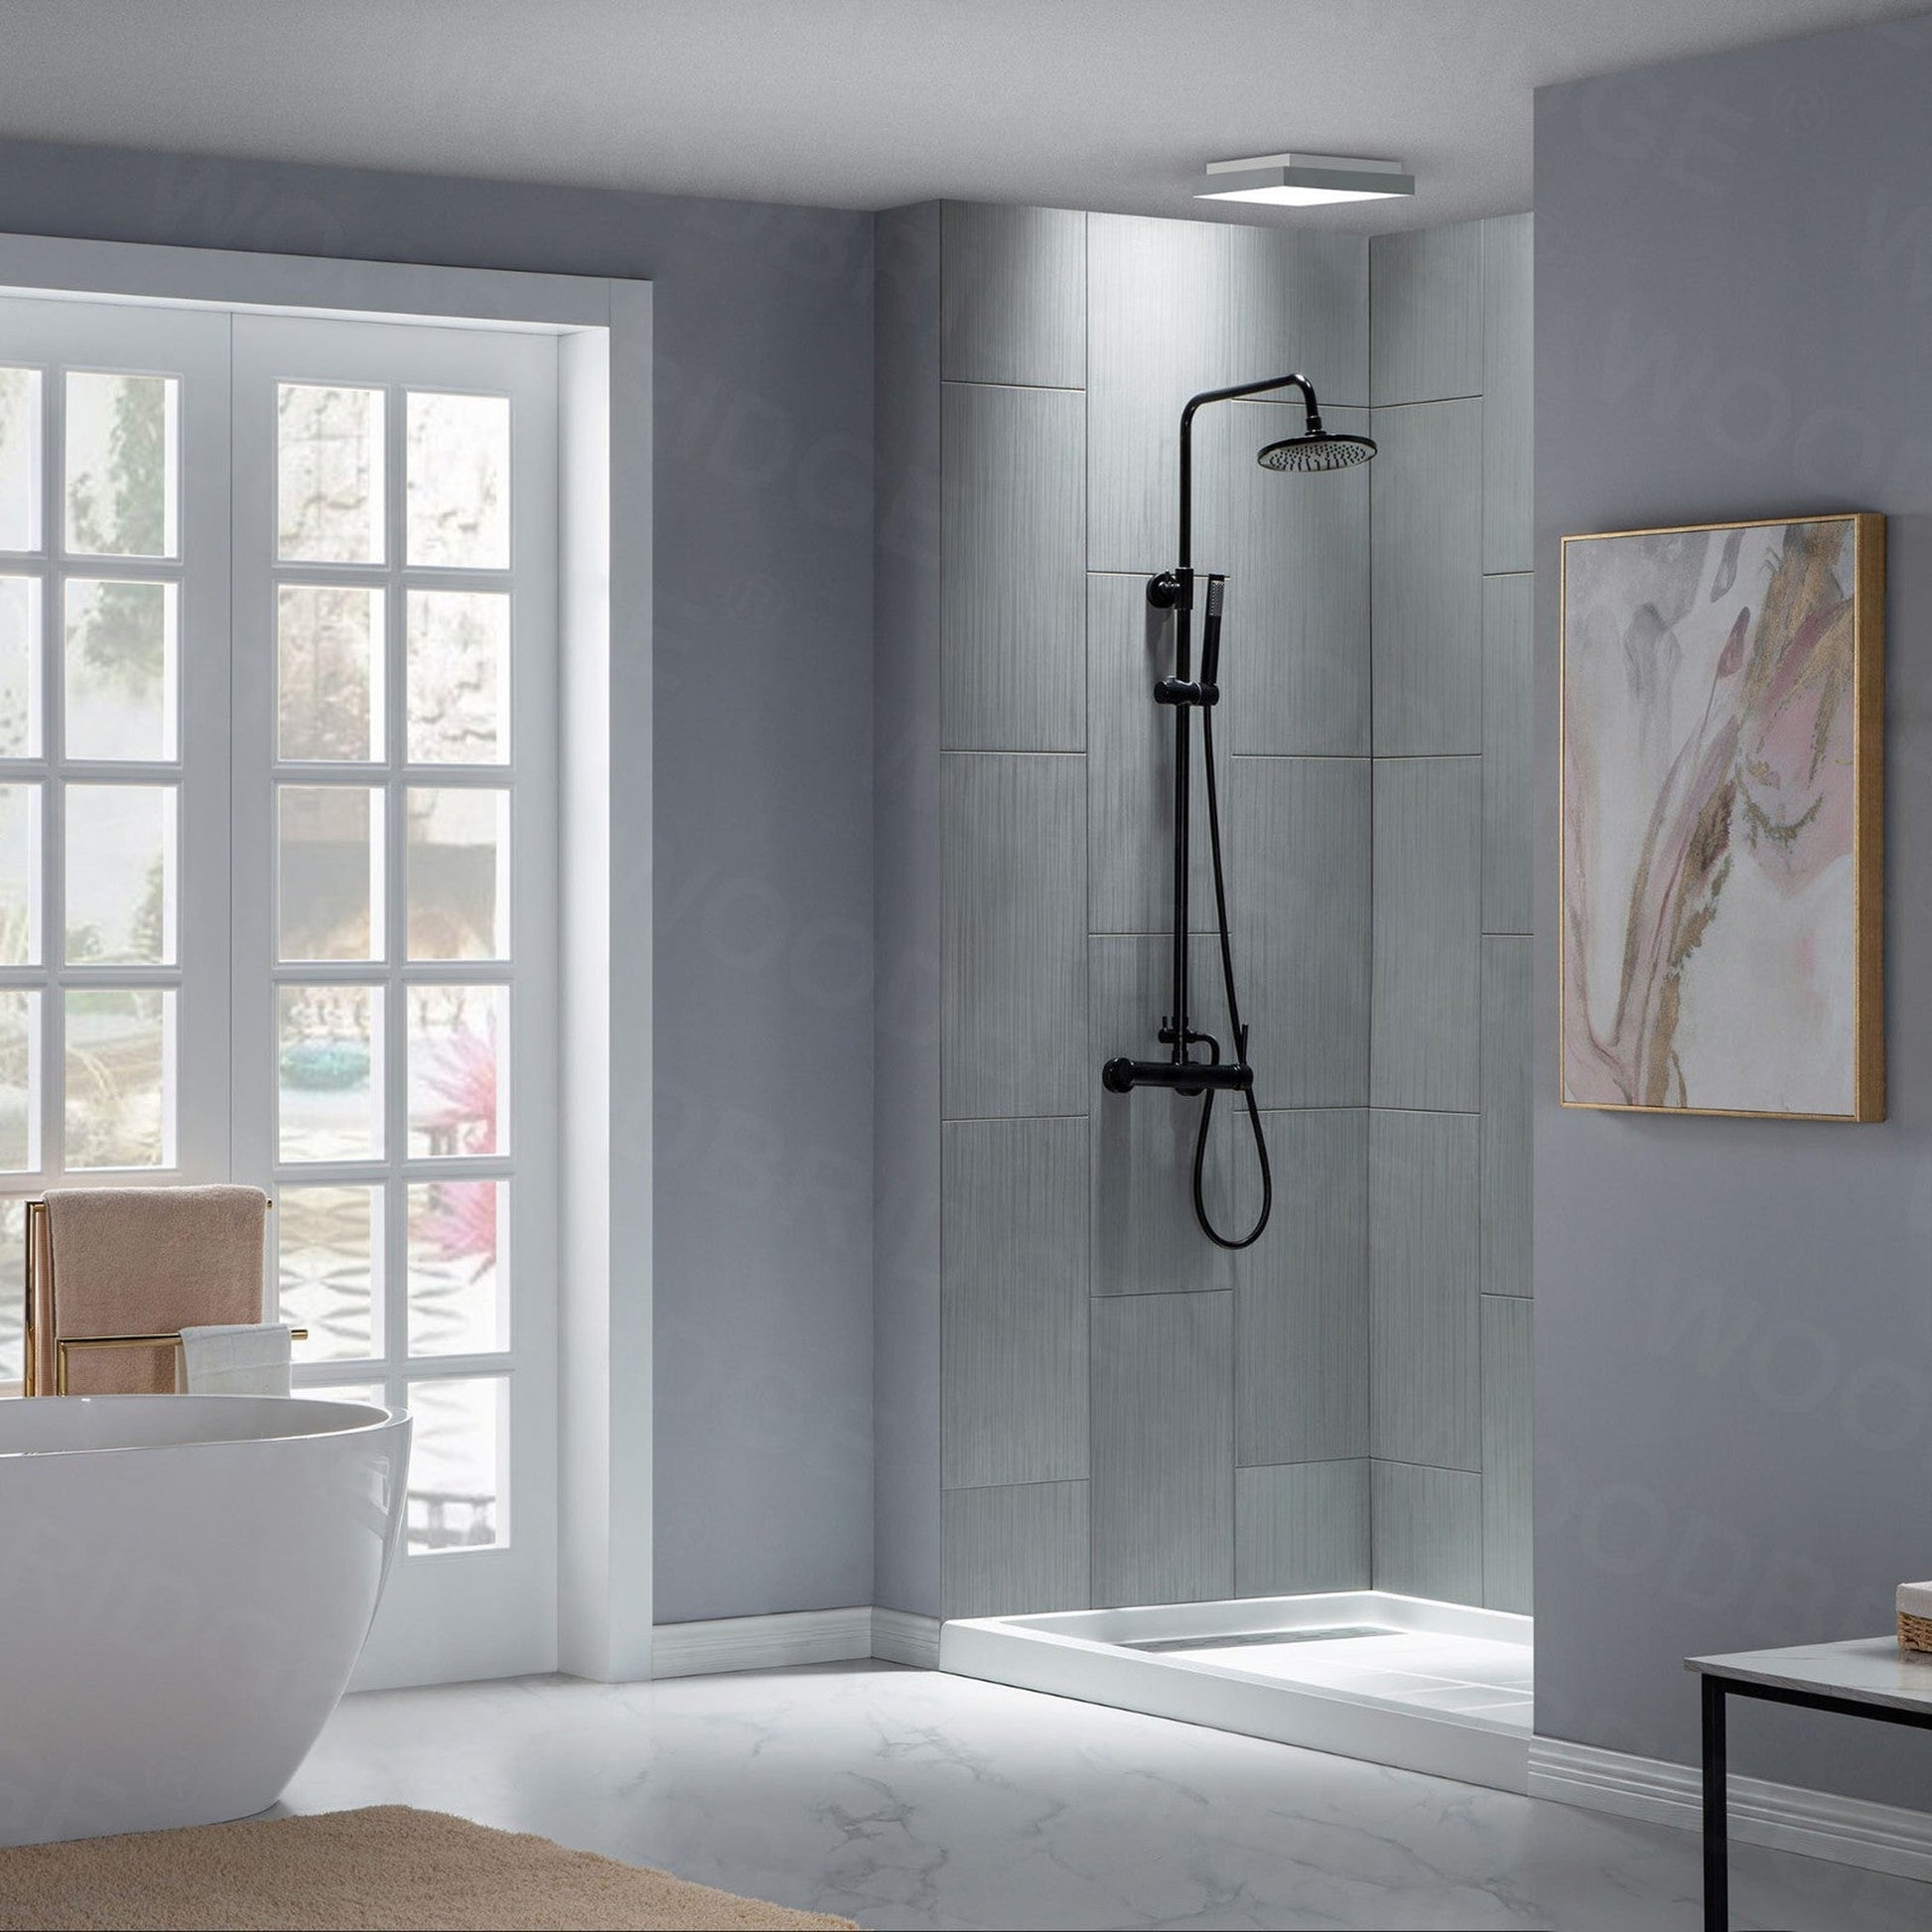 WoodBridge 60" W x 36" L 96" H Matte Gray Finish Solid Surface Staggered Vertical Pattern 3-Panel Shower Wall Kit